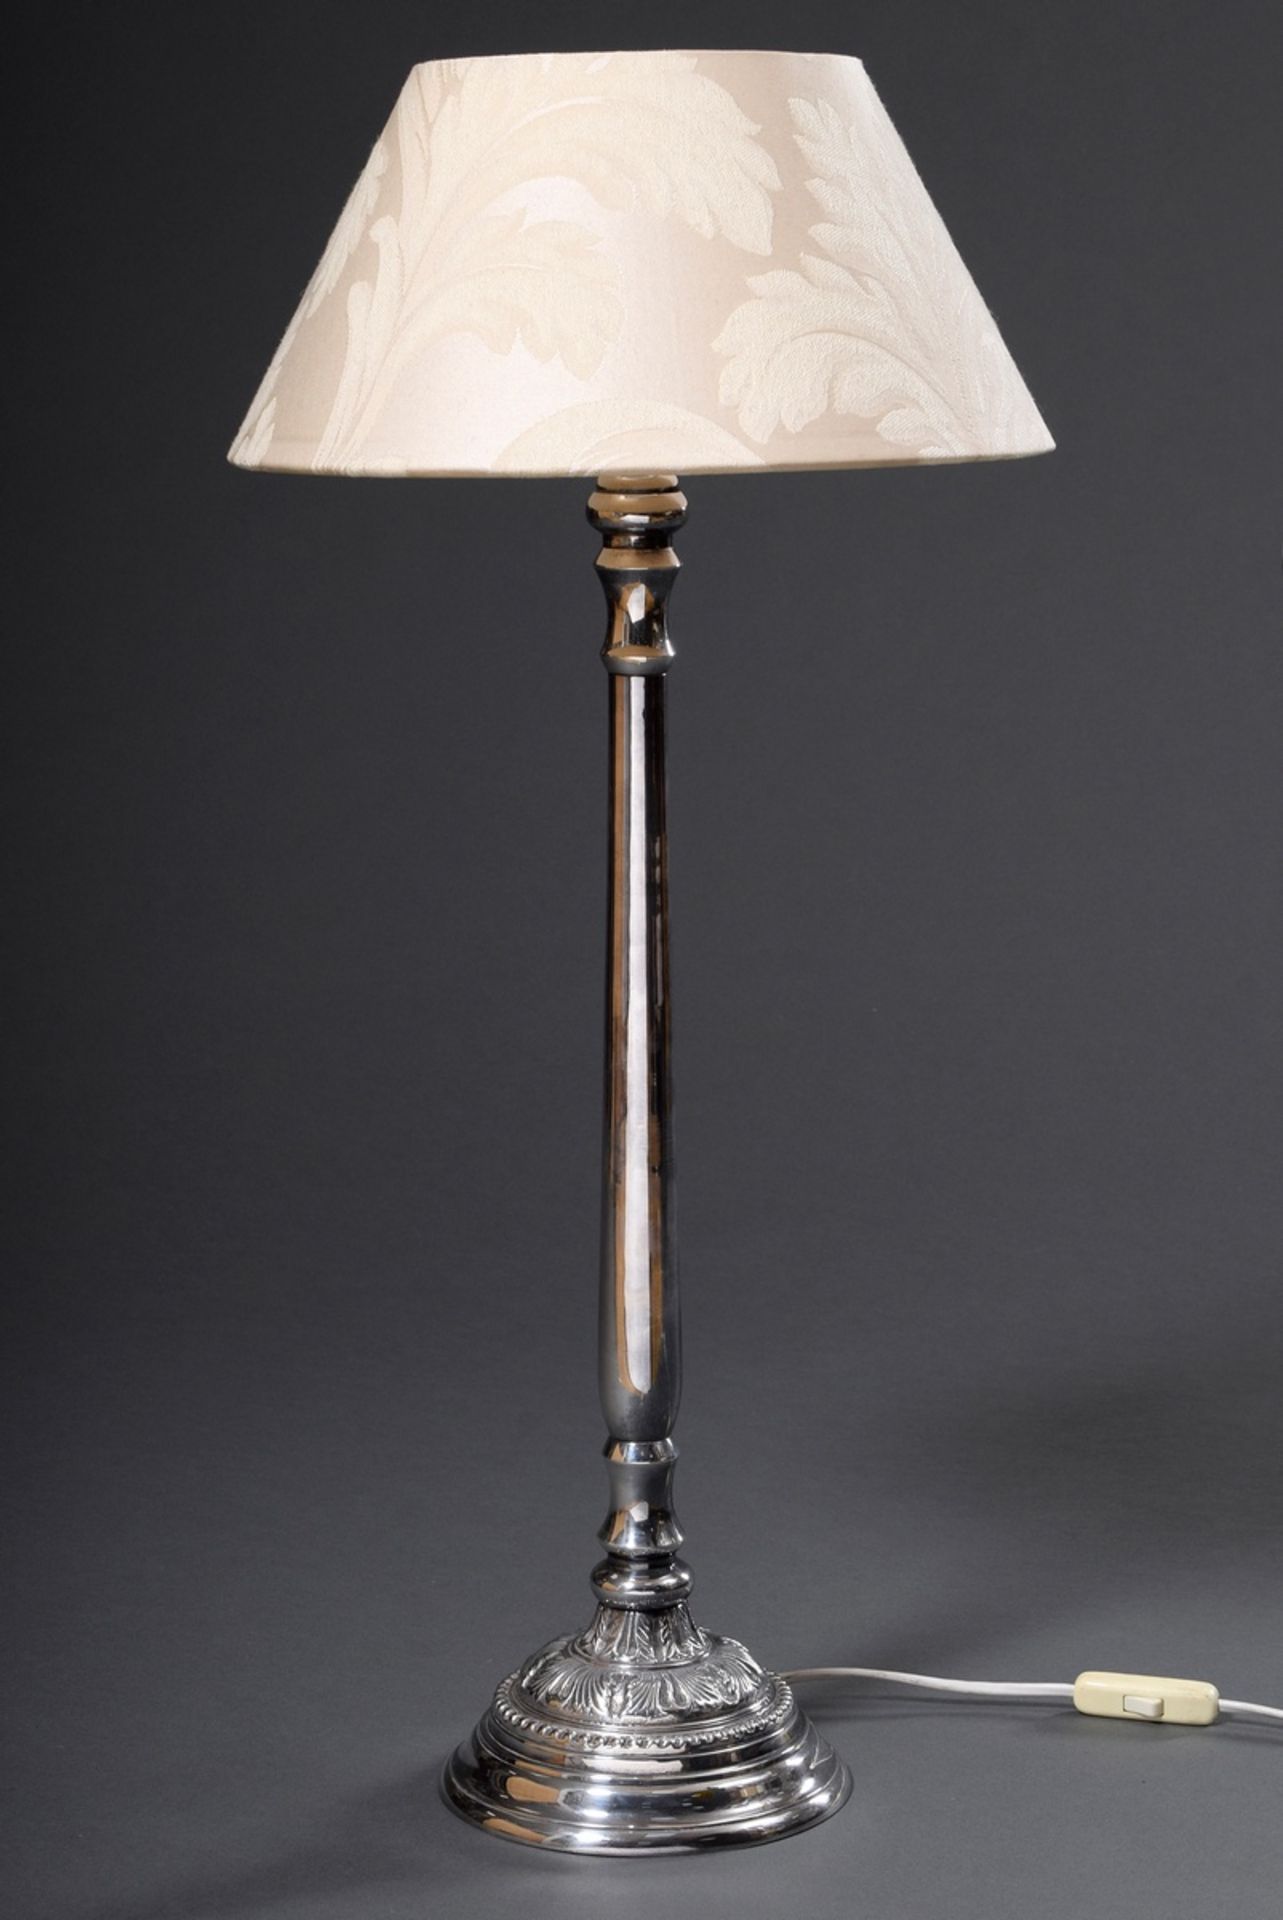 Modern silver-plated column chandelier with smooth shaft mounted on a round base with classical rel